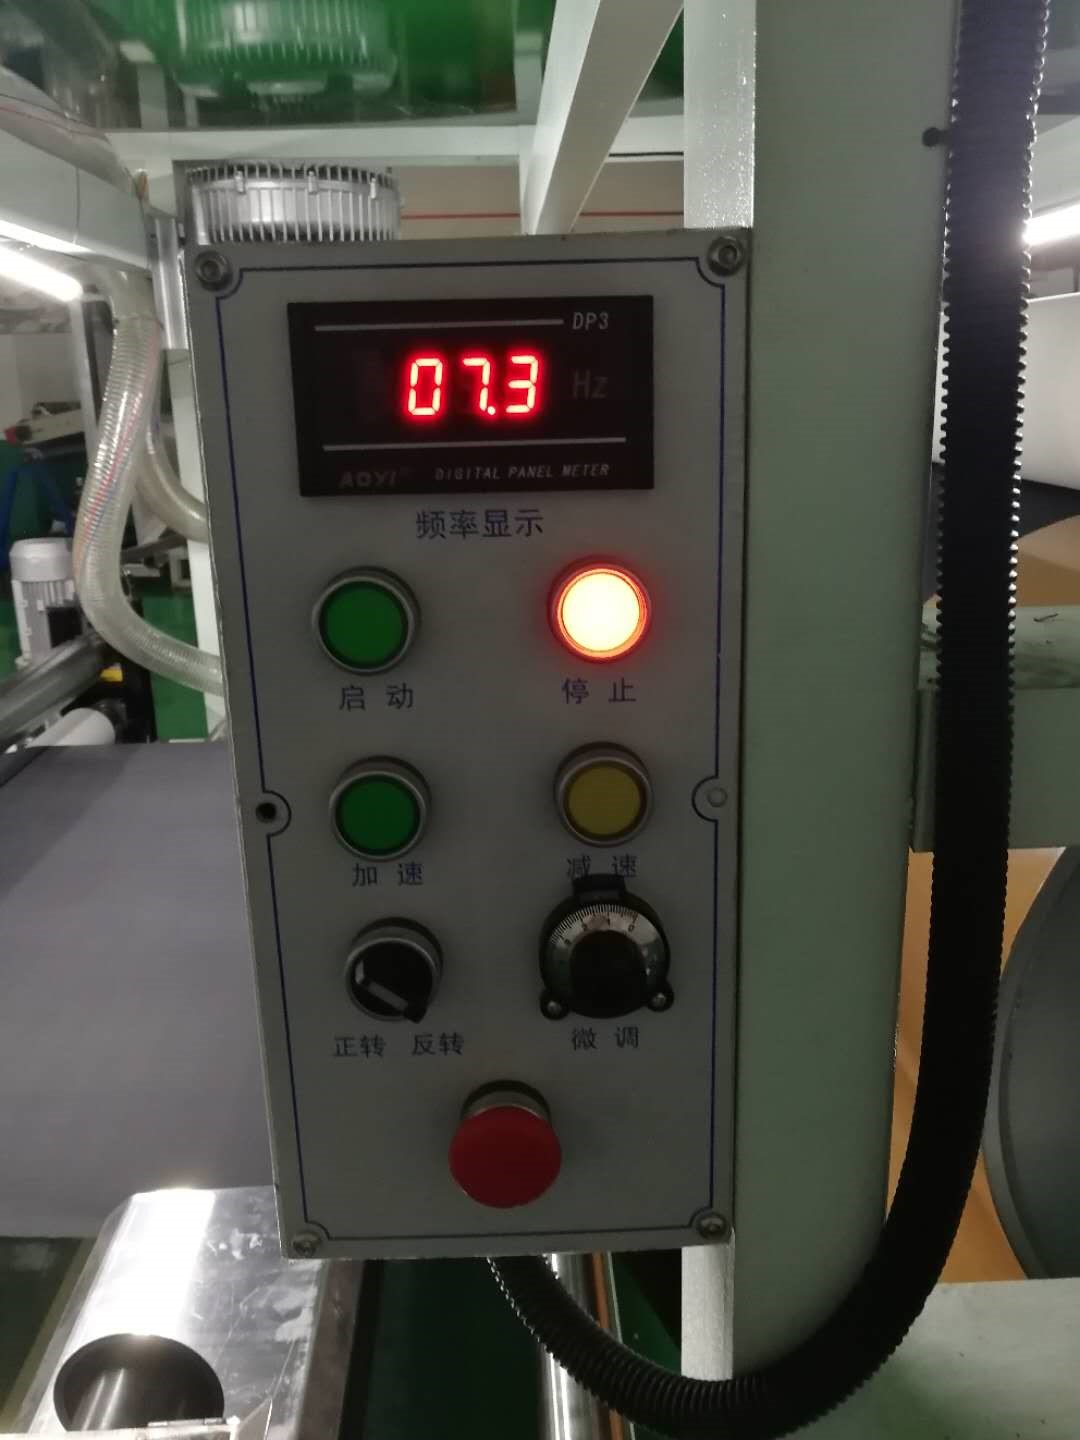 Application of AC300 Inverter in Synchronous Control of Composite Machine